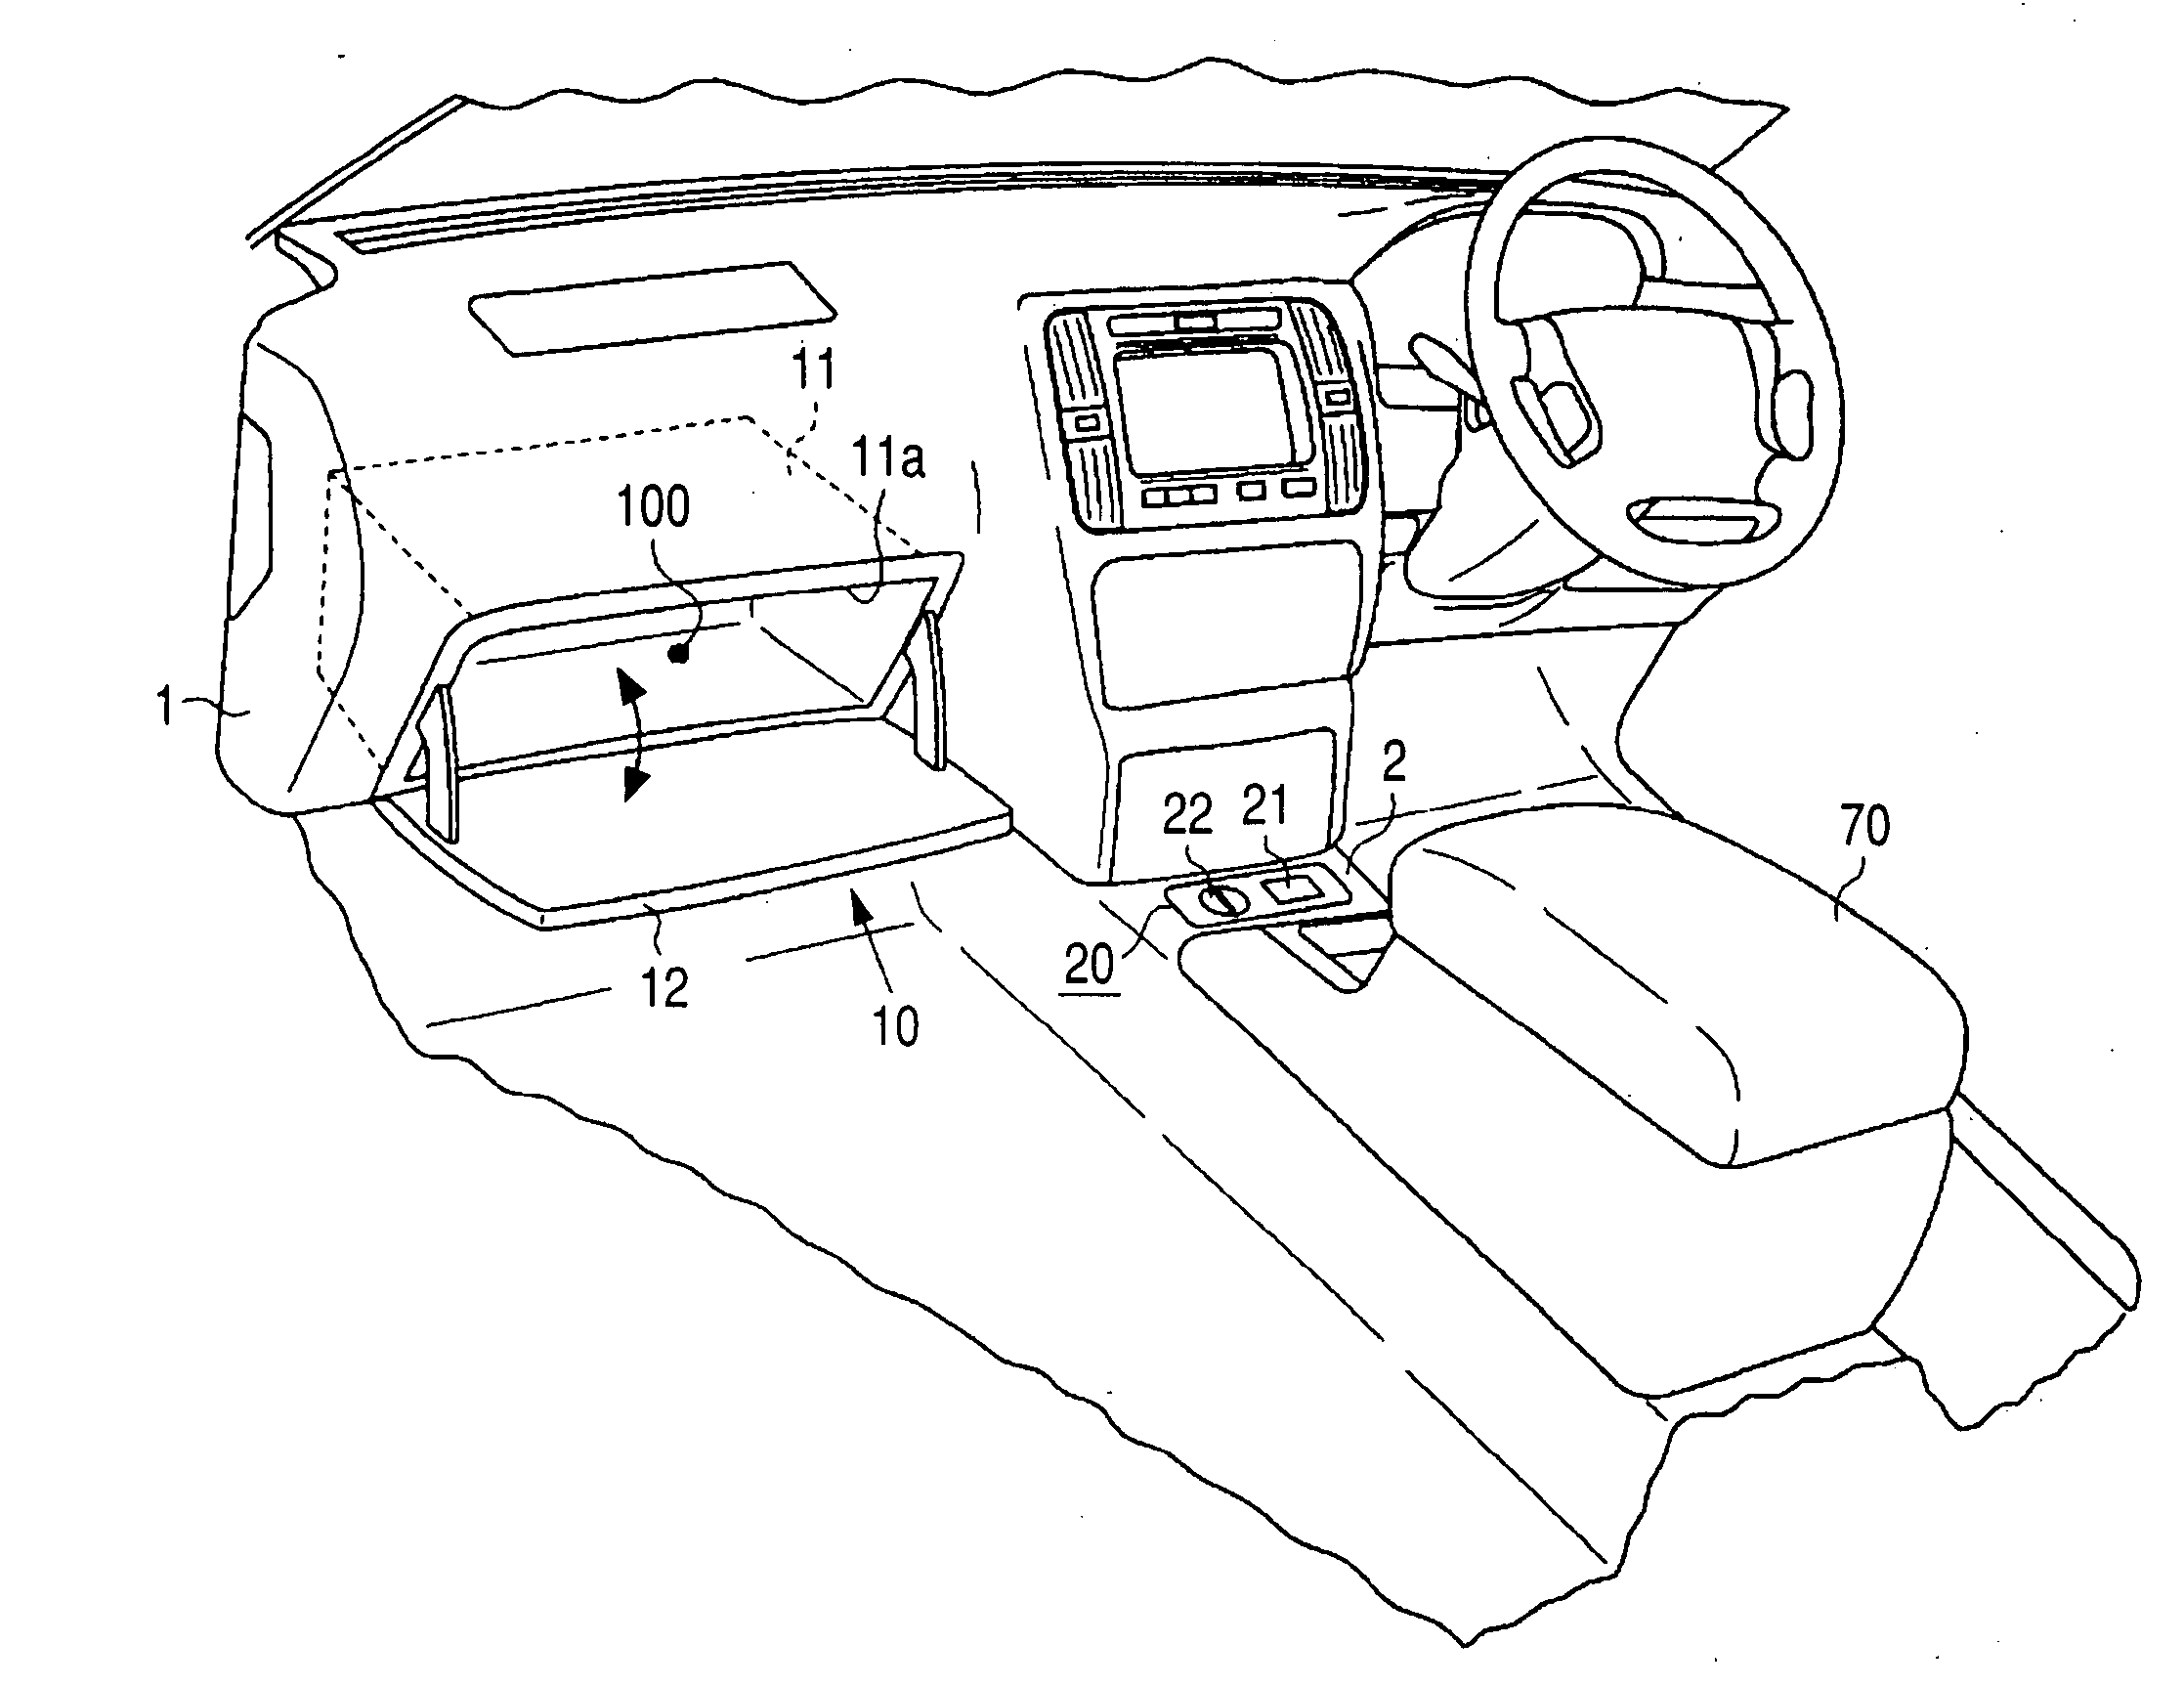 Lock system of small article compartment in vehicle